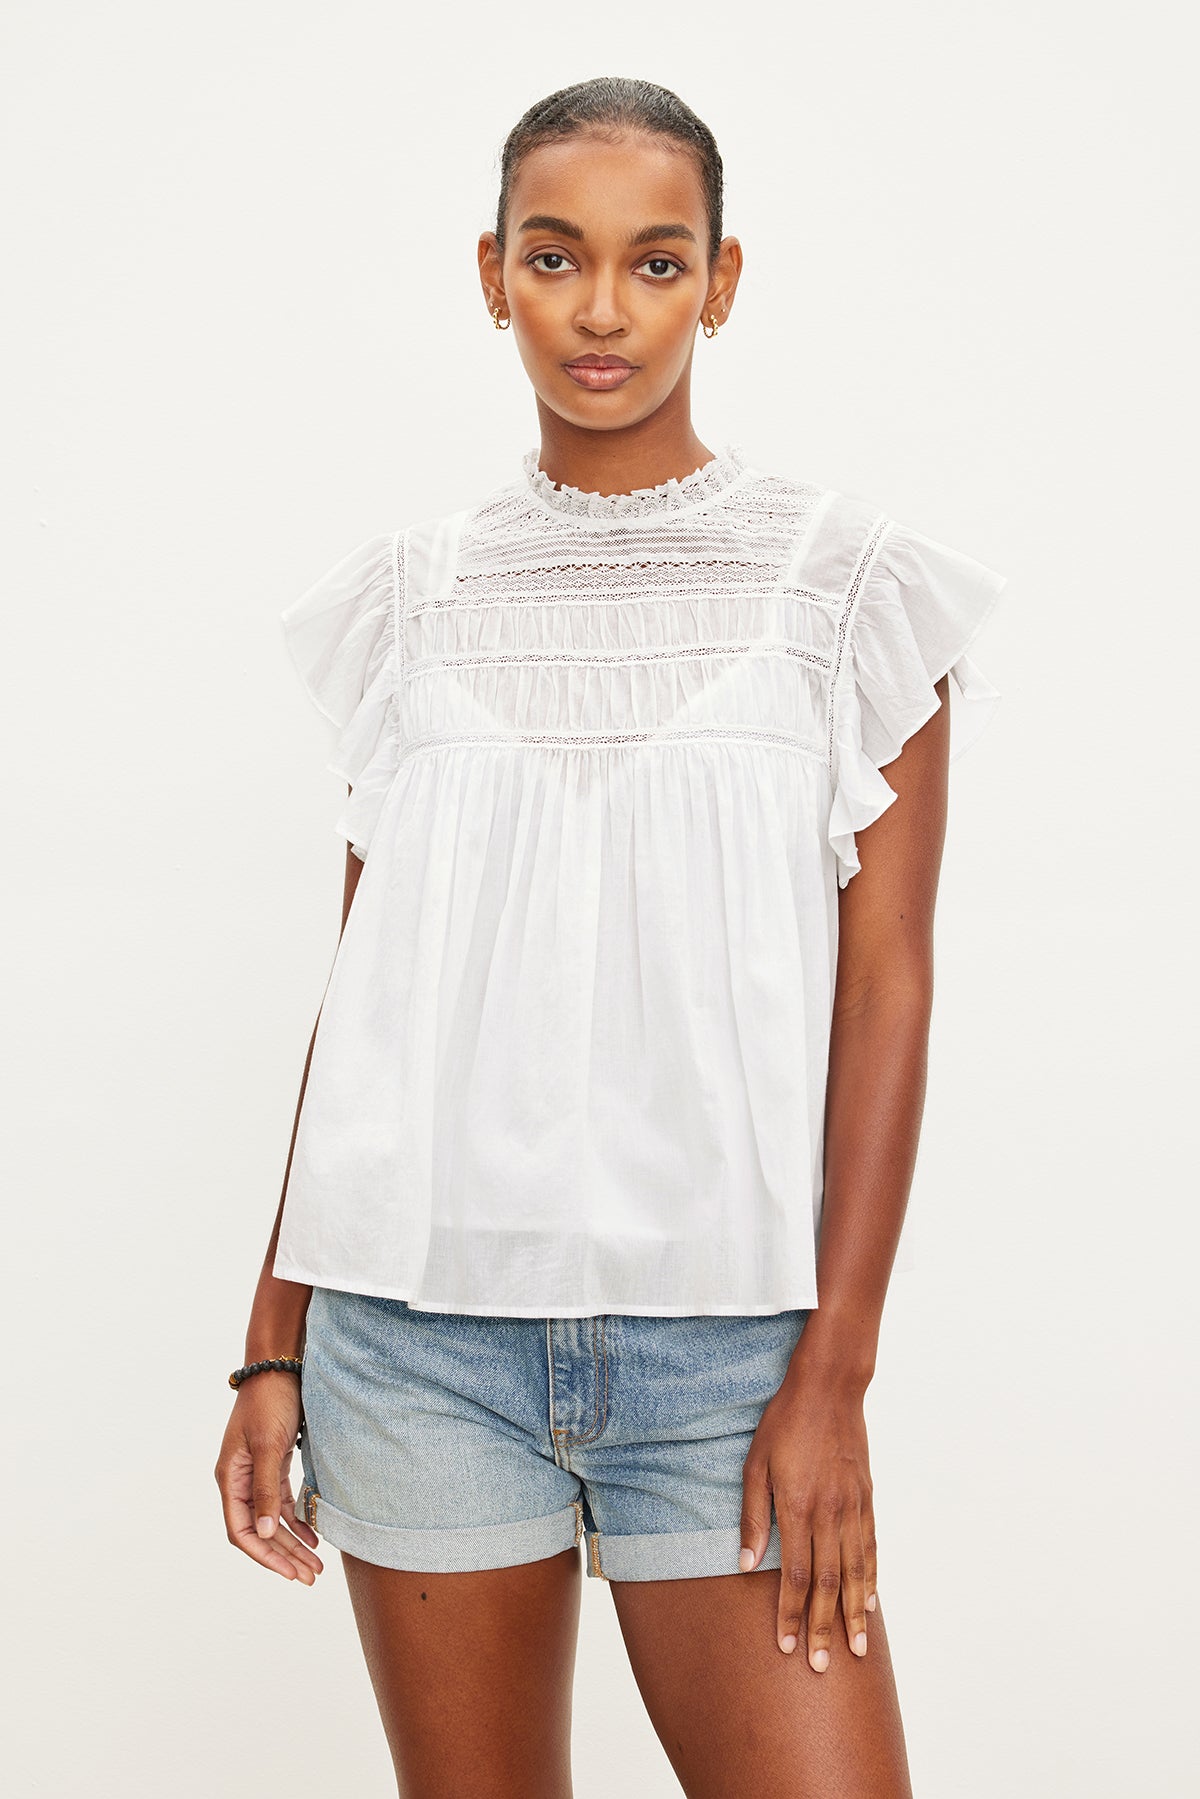   The model is wearing a Velvet by Graham & Spencer INESSA COTTON LACE TOP with ruffled sleeve. 